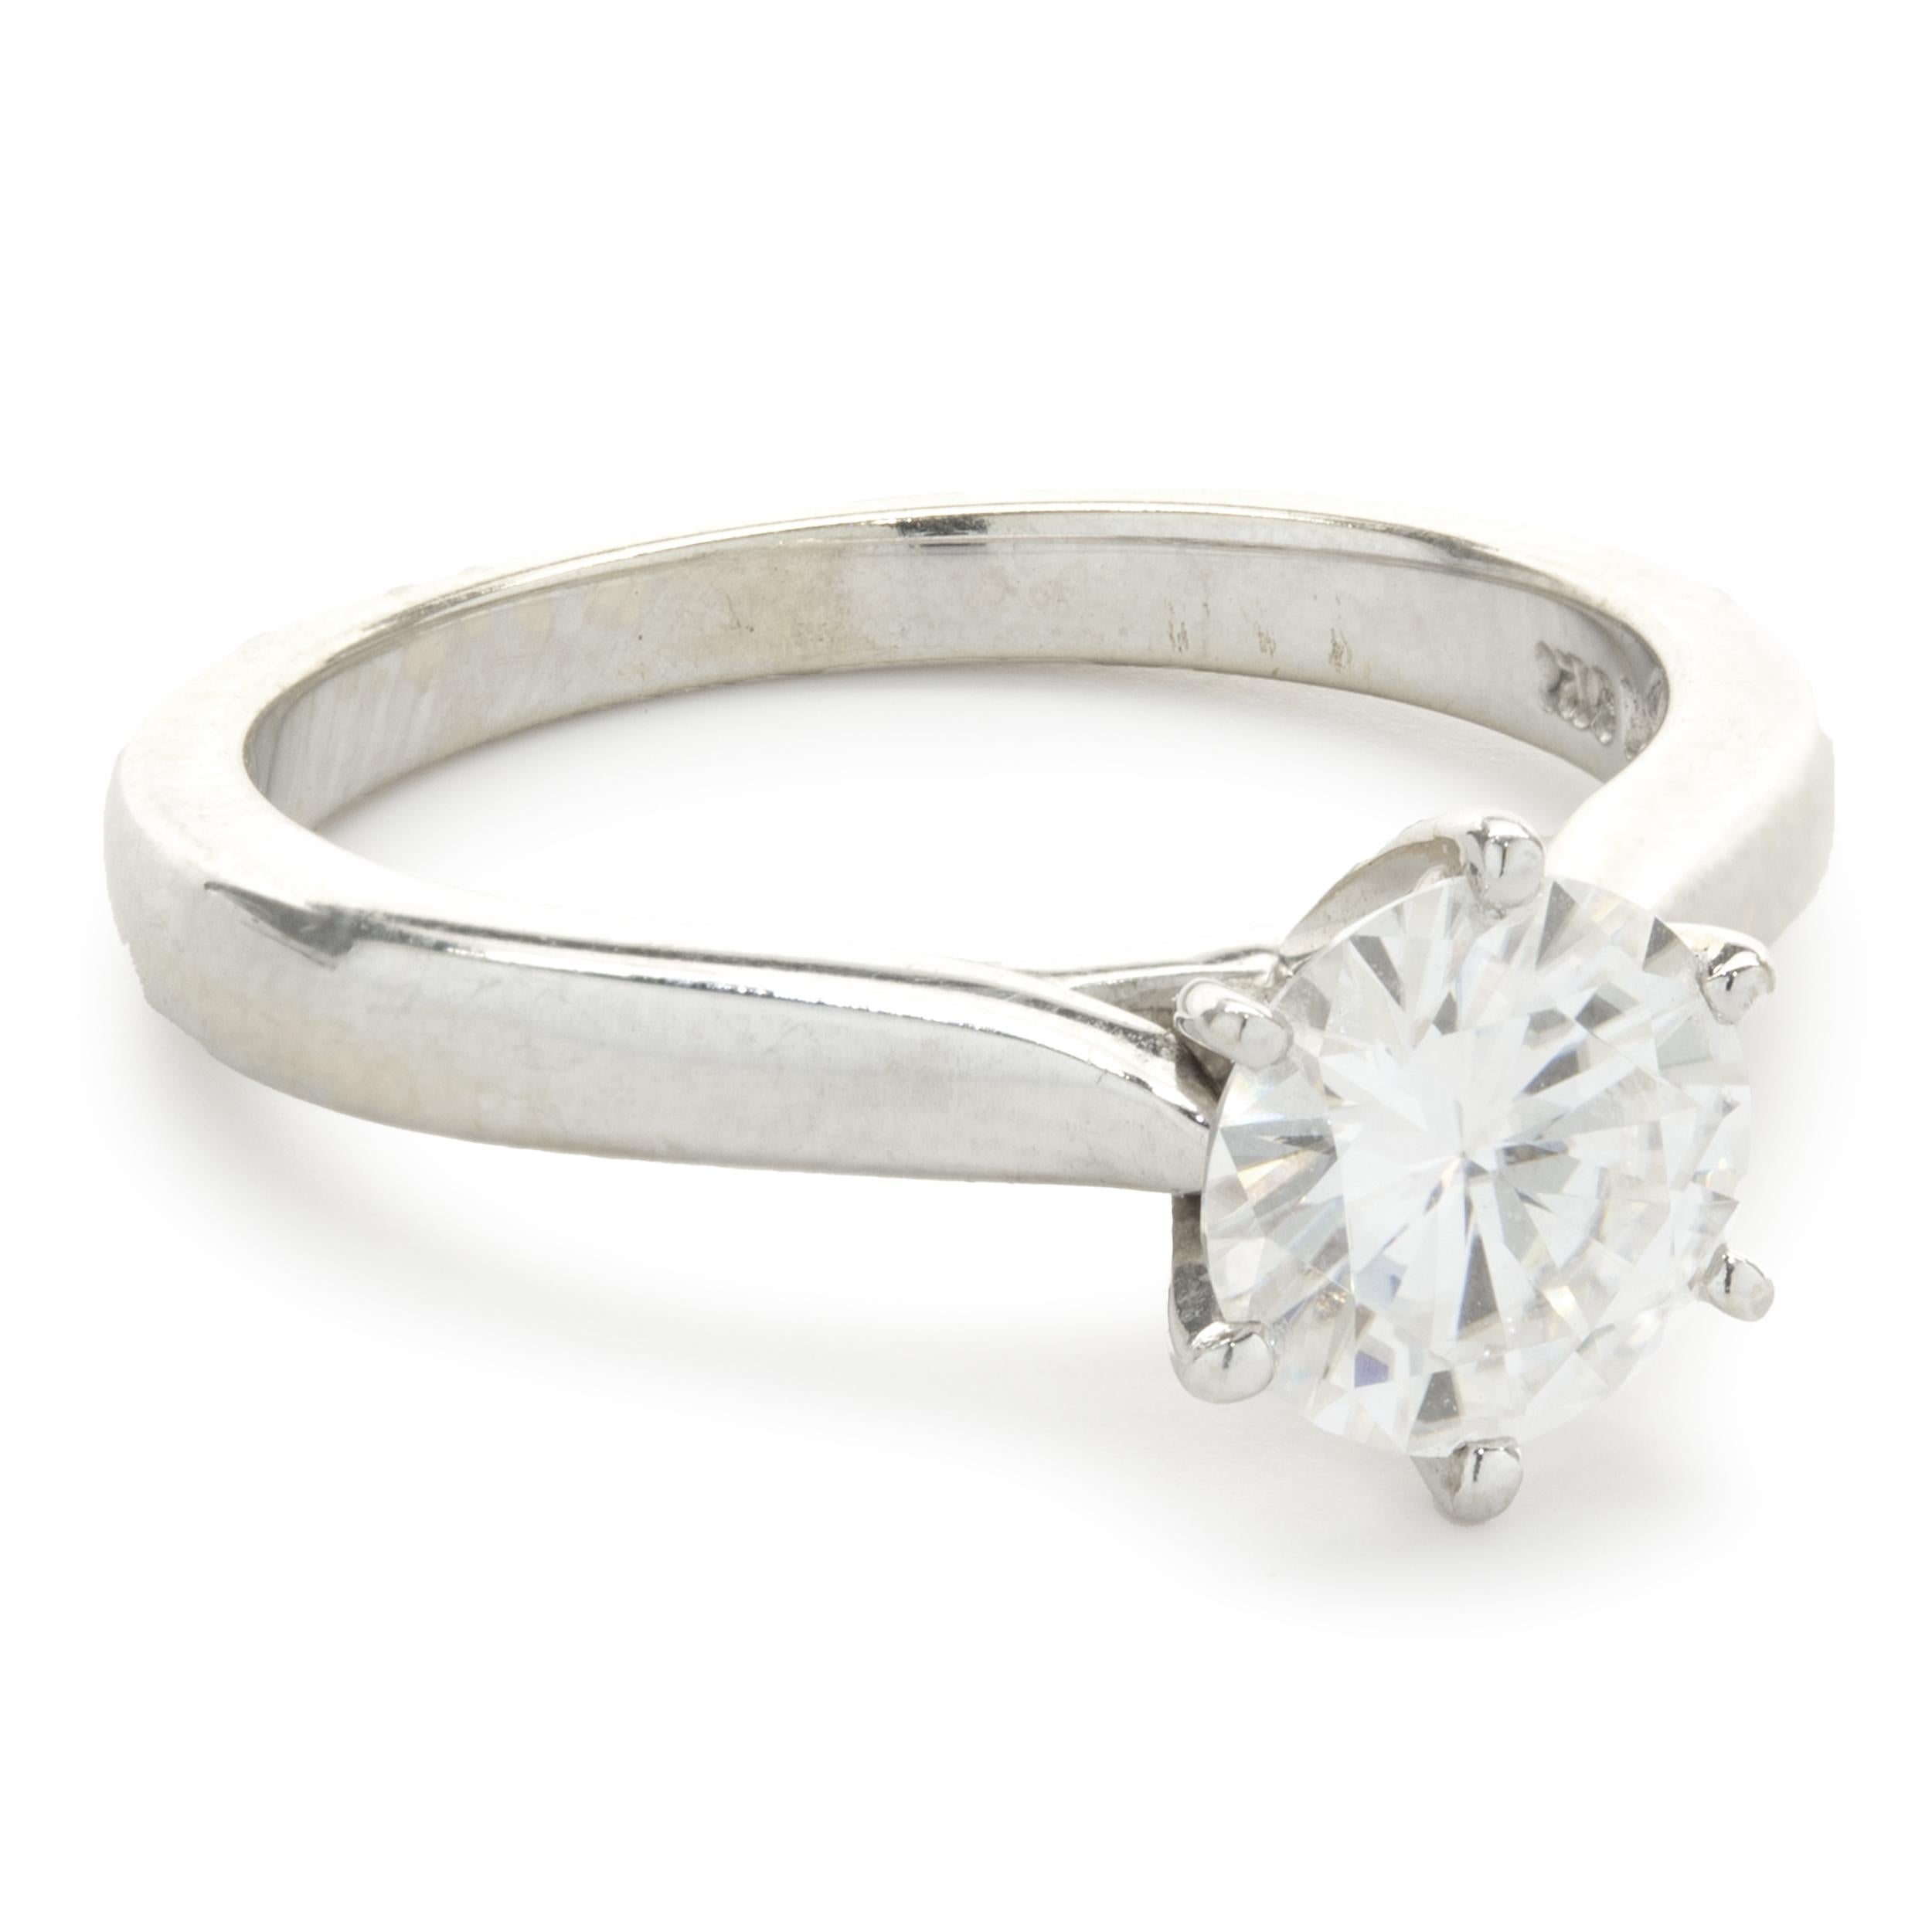 Designer: custom
Material: 14K white gold
Moissonite: 1 round cut = 1.00cttw
Dimensions: ring top measures 7.89mm wide
Ring Size: 5.75 (complimentary sizing available)
Weight: 3.36 grams
